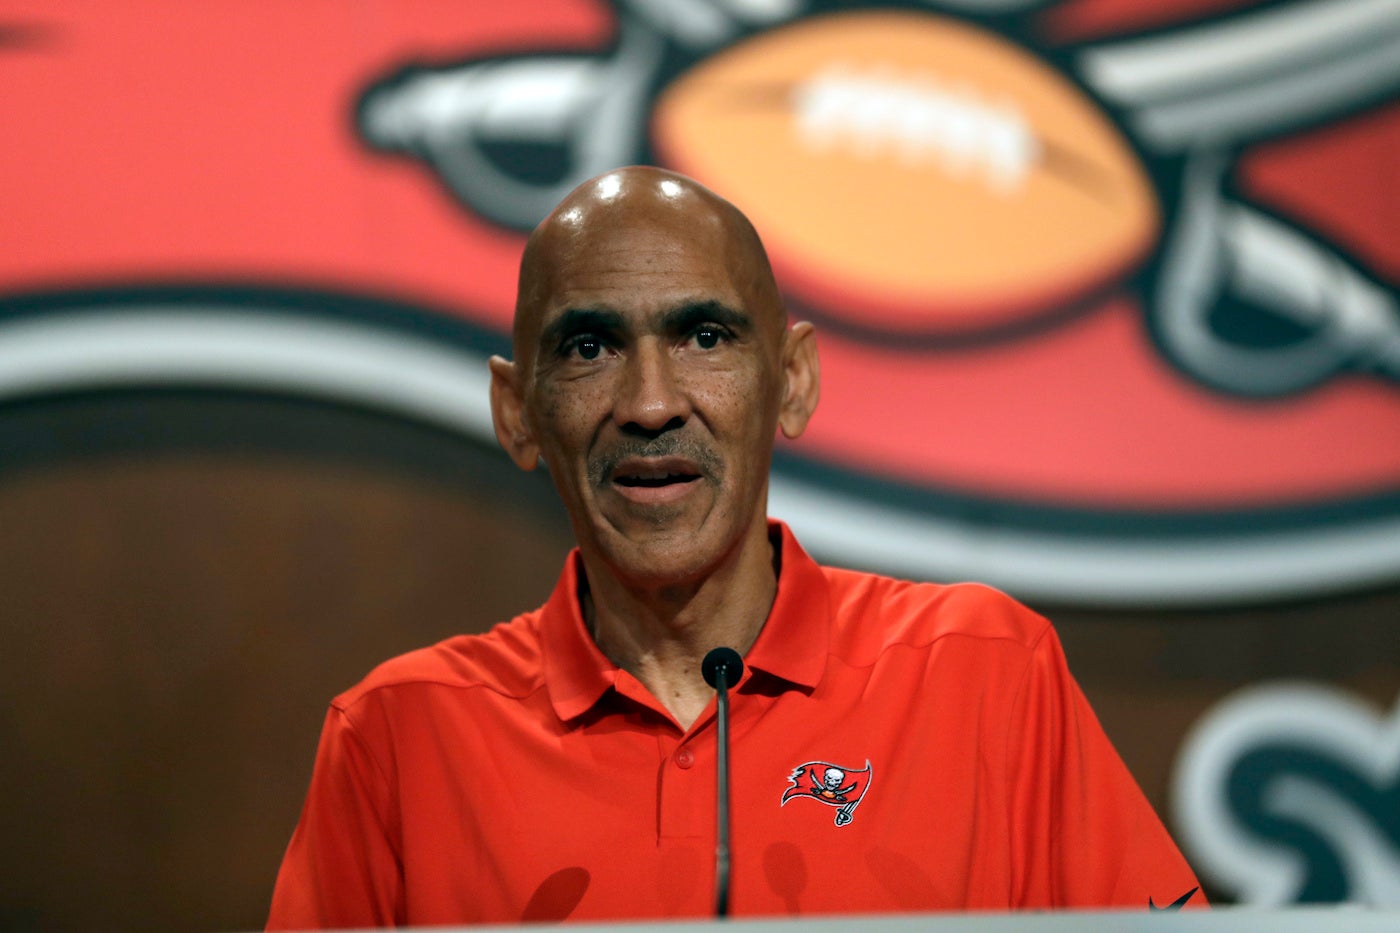 Famed NFL Coach Tony Dungy Defends Drew Brees After National Anthem